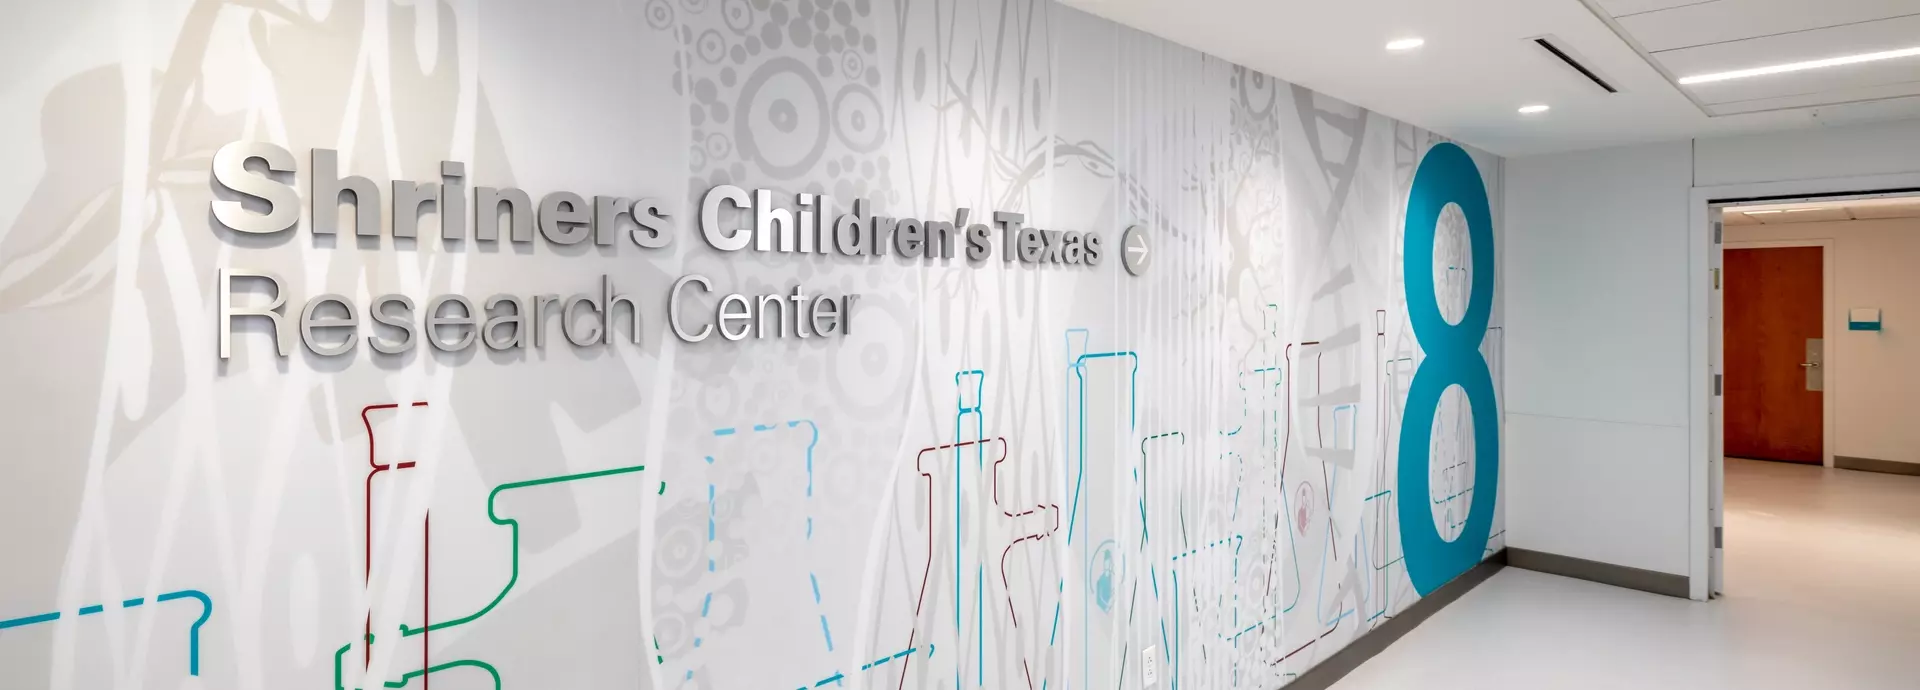 Shriners Hospital Acrovyn by Design wall covering